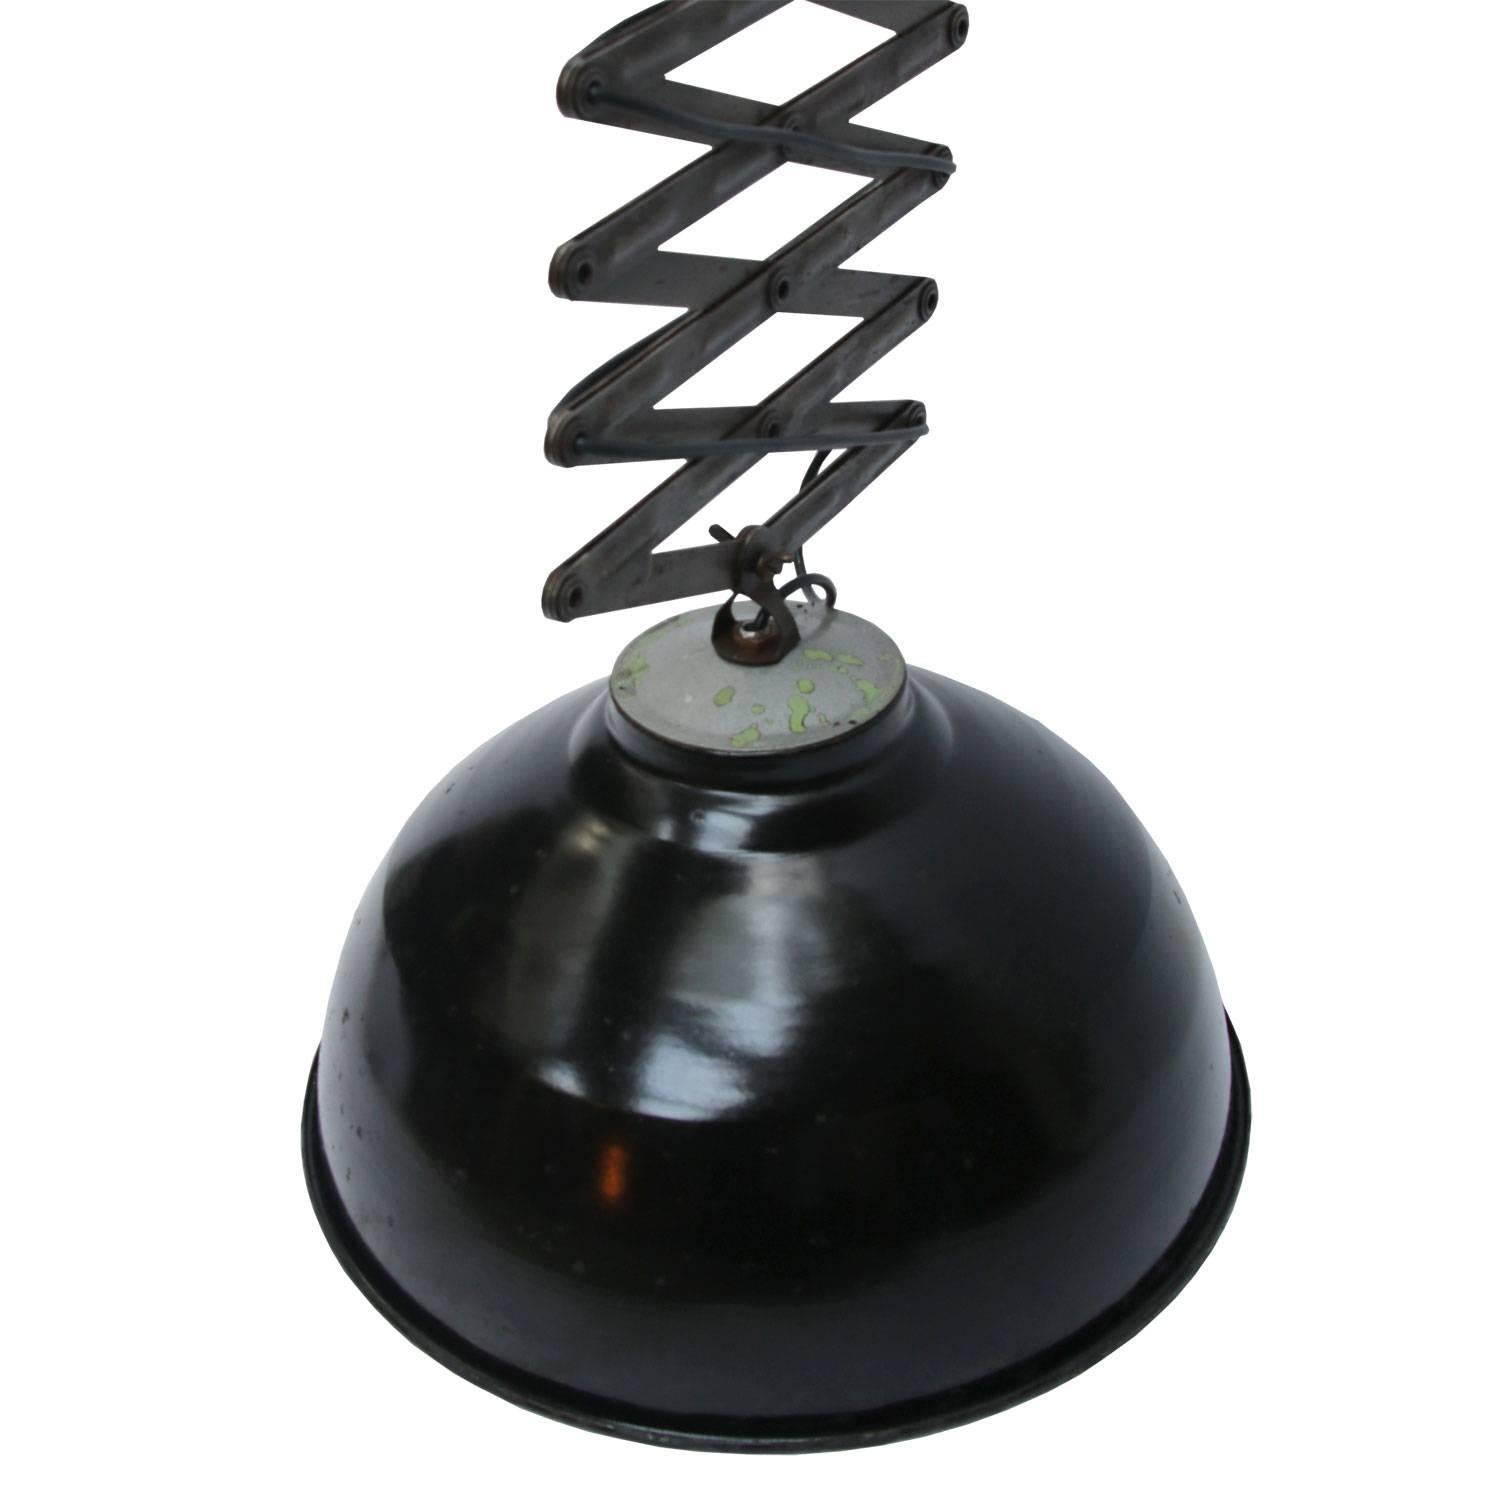 Scissor varia steel pendant. Black enamel spot. White interior.

Weight: 6.0 kg / 13.2 lb

Priced per individual item. All lamps have been made suitable by international standards for incandescent light bulbs, energy-efficient and LED bulbs.